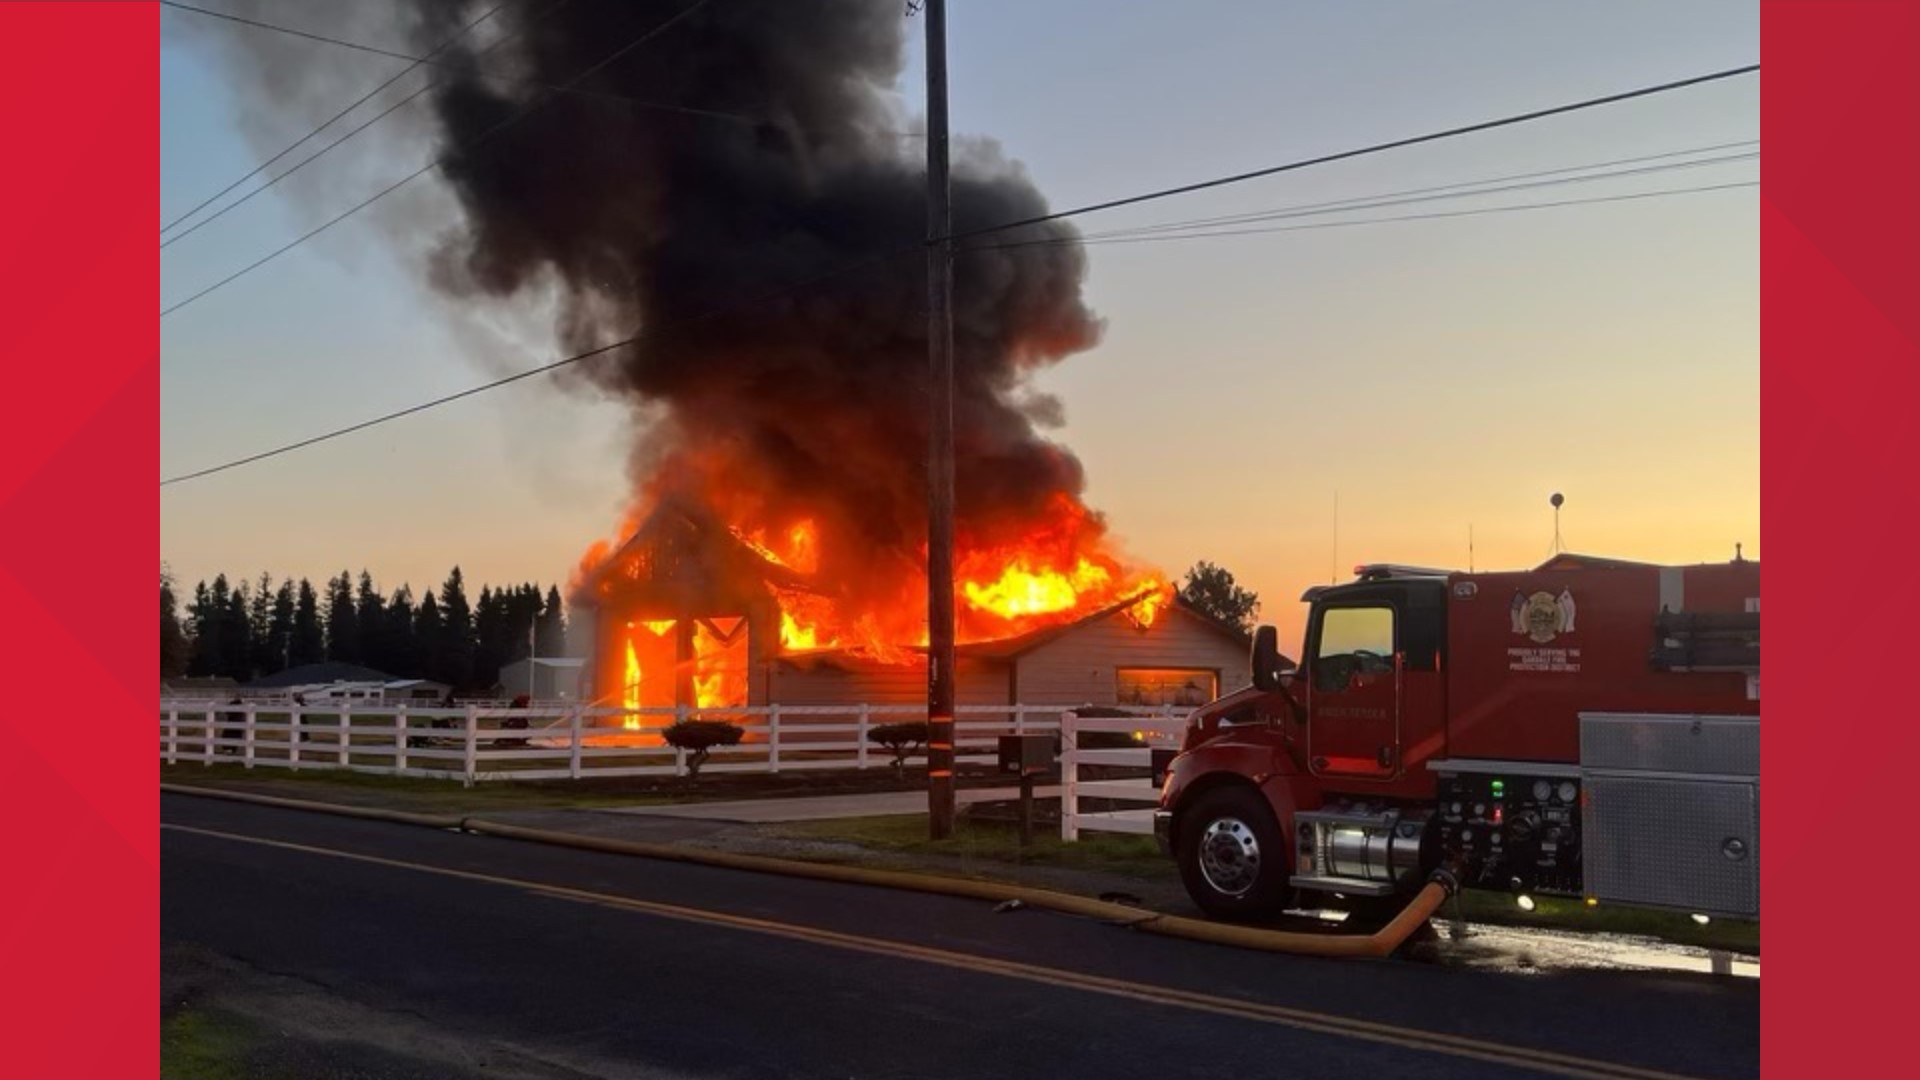 Modesto Fire Department said no one was hurt after a fire sparking in an Oakdale out building.